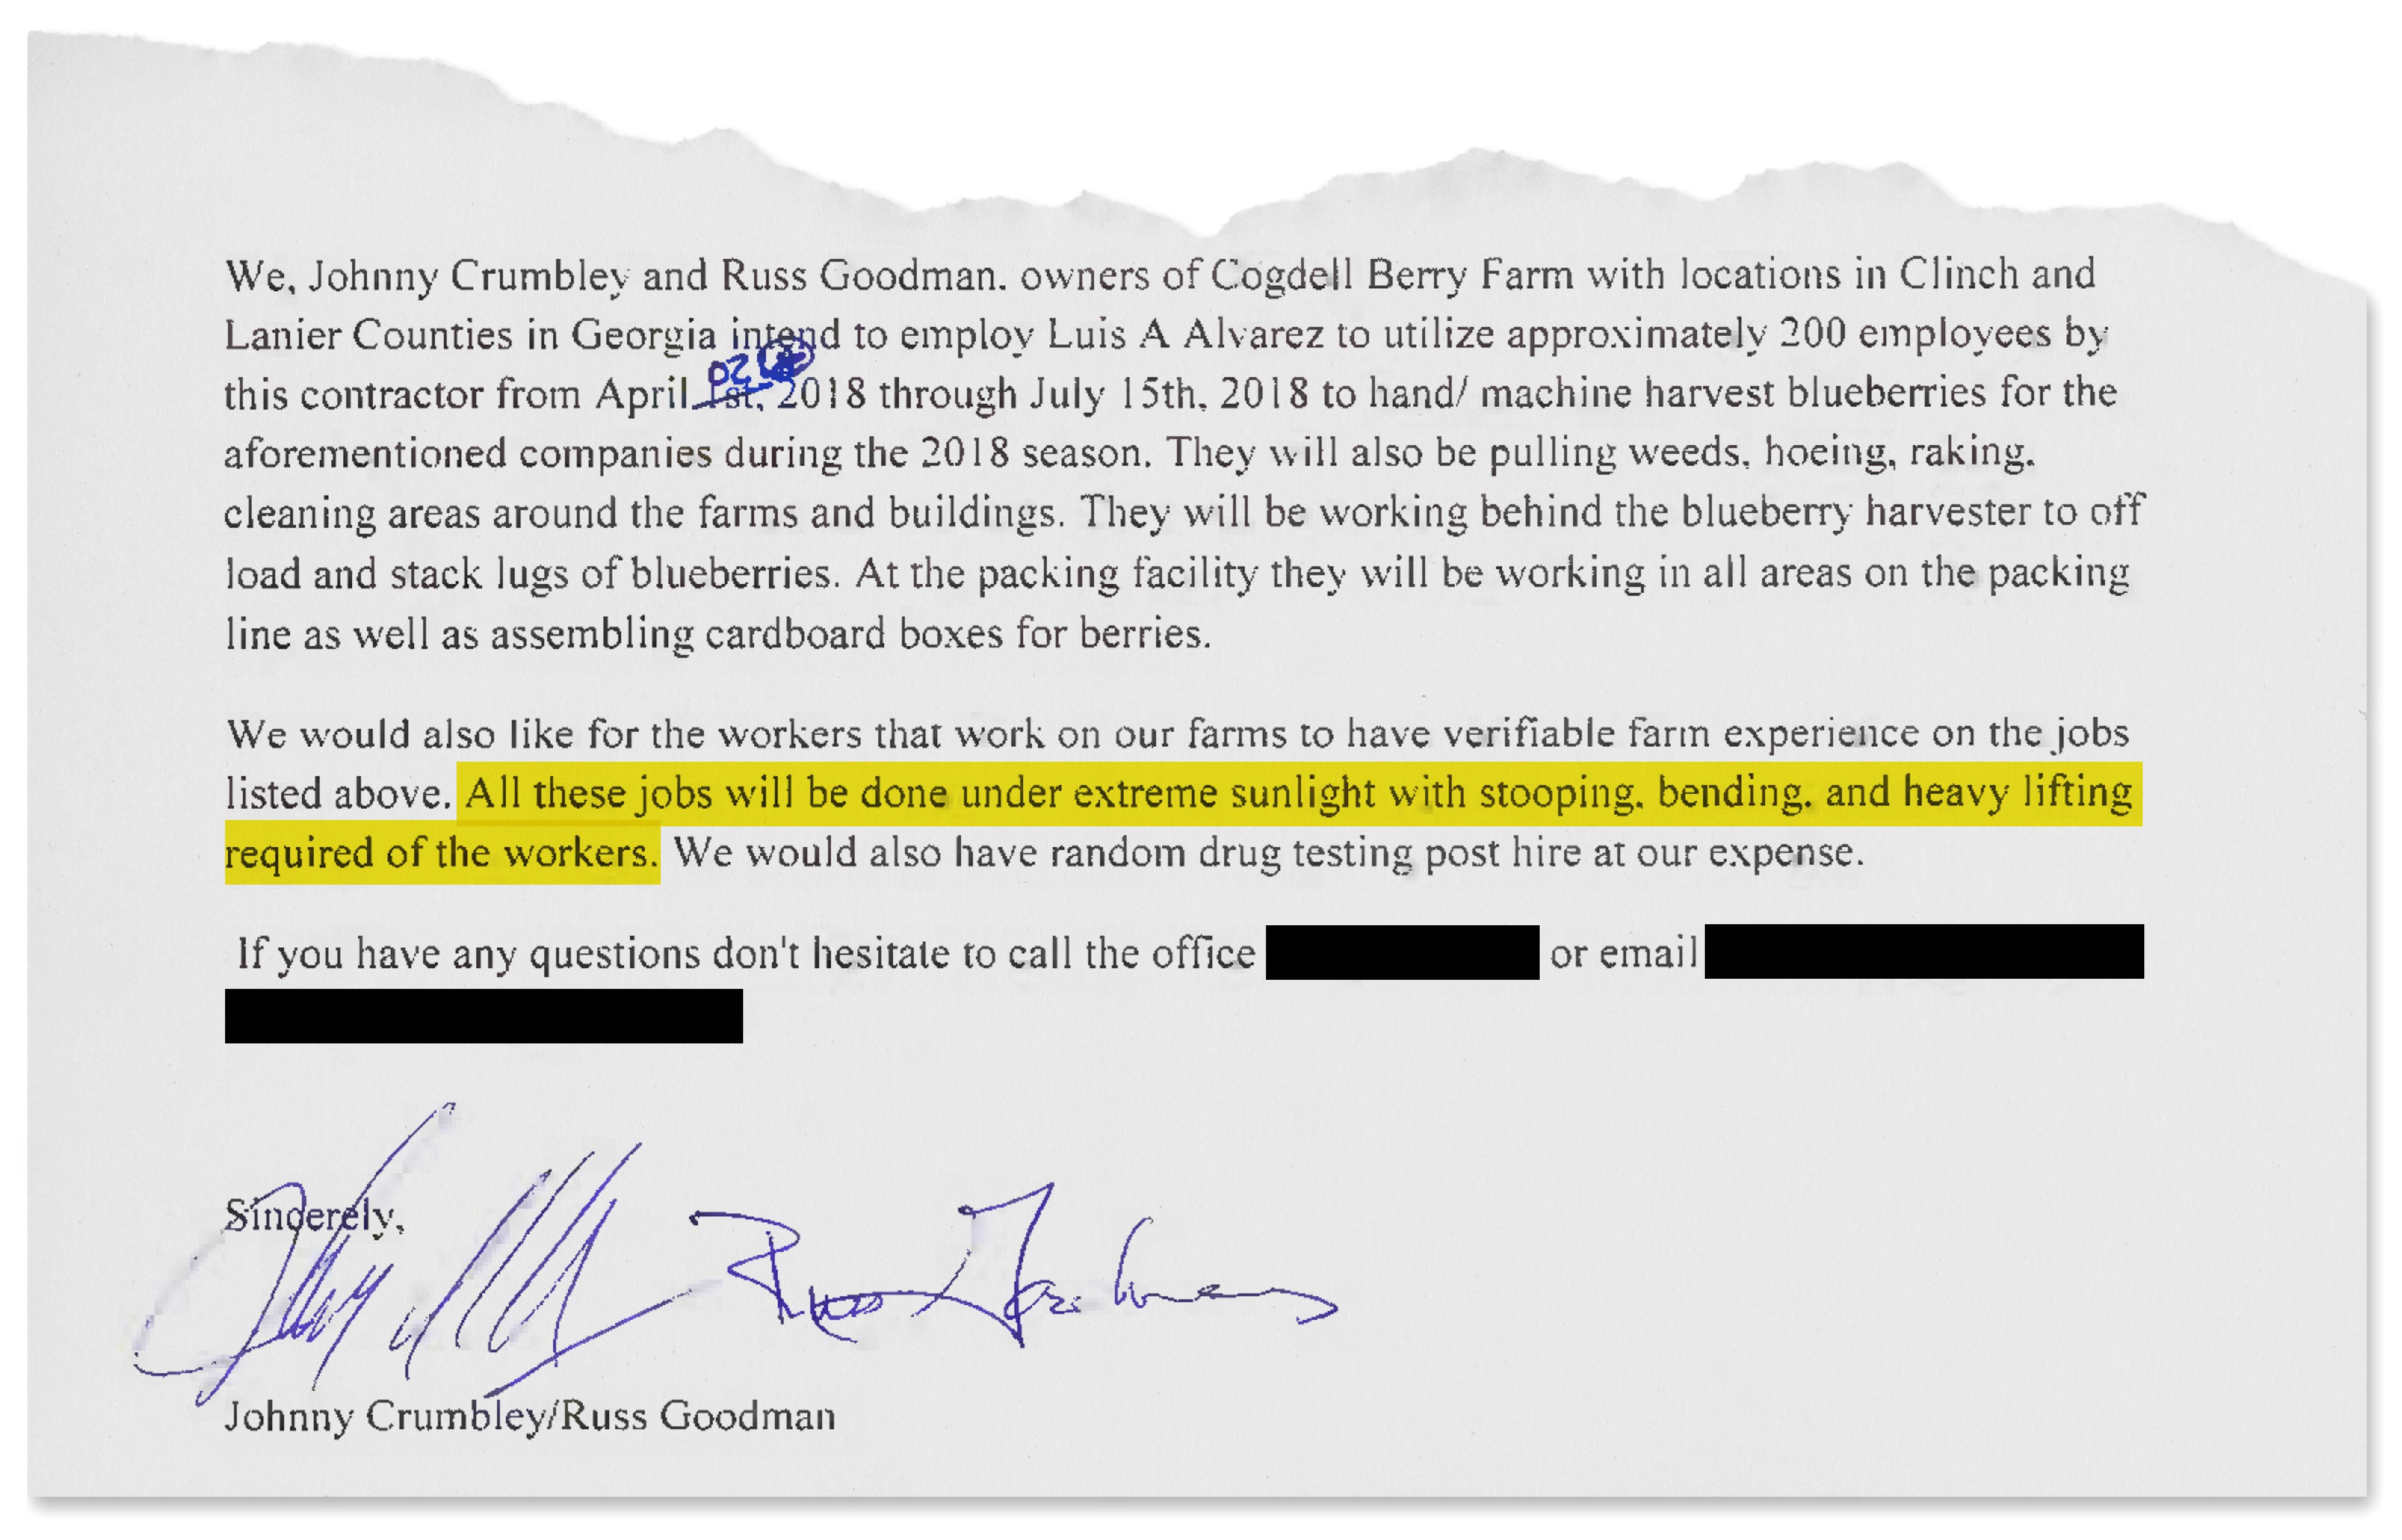 A letter from the owners of Cogdell Berry Farm, Johnny Crumbley and Russ Goodman, about the work and conditions to harvest blueberries during the 2018 season. Highlighted and redacted info by USA TODAY.